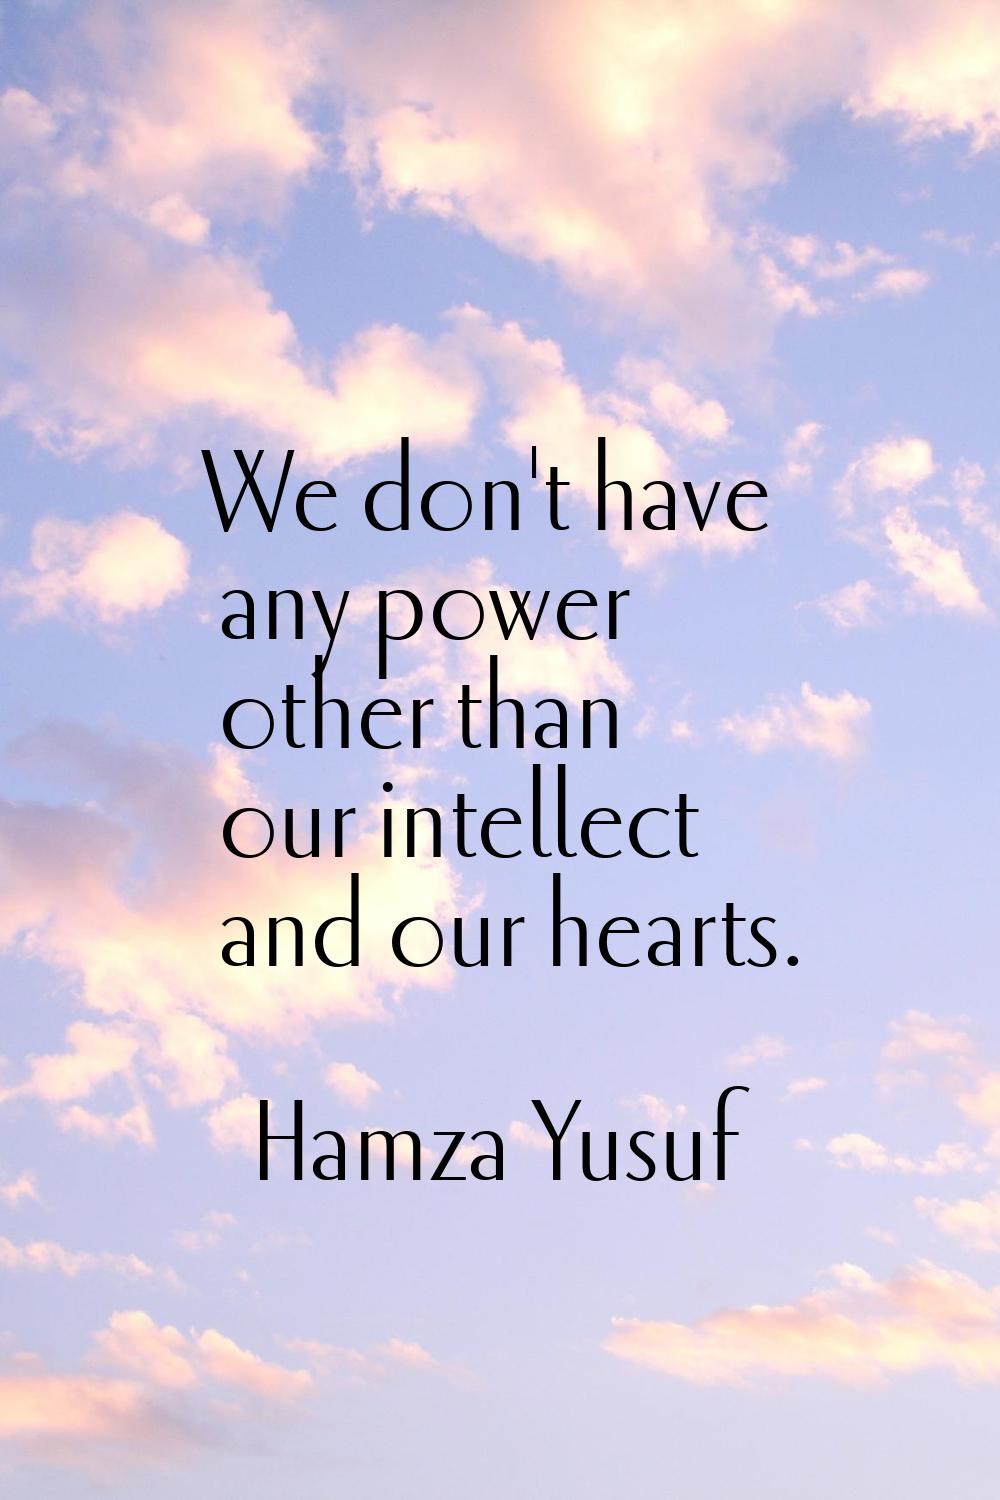 We don't have any power other than our intellect and our hearts.